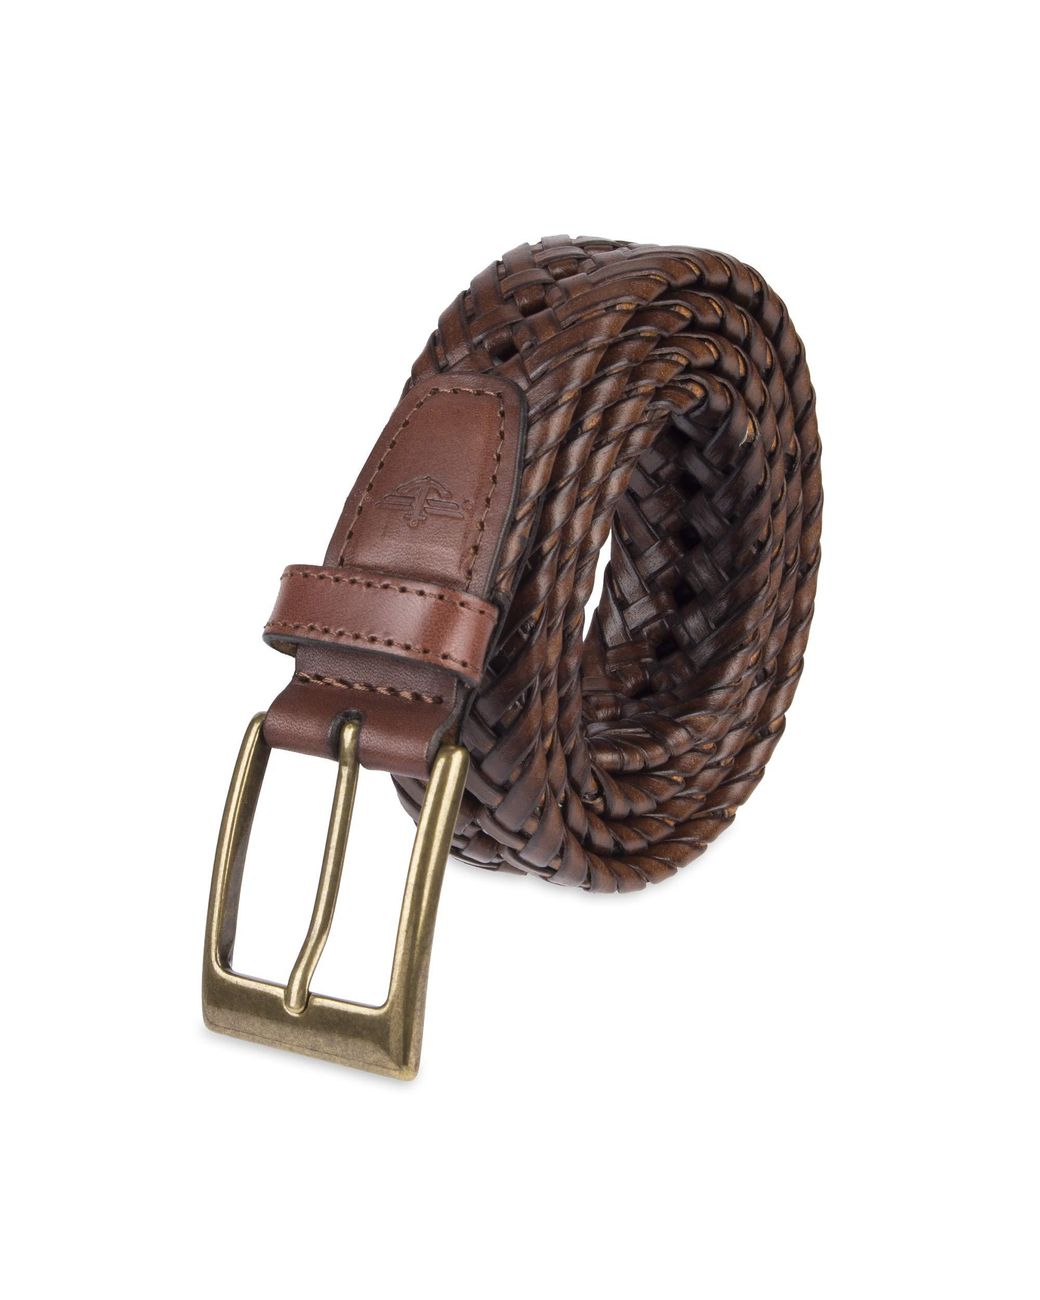 Dockers Lace Braided Belt in Brown for Men - Save 4% - Lyst